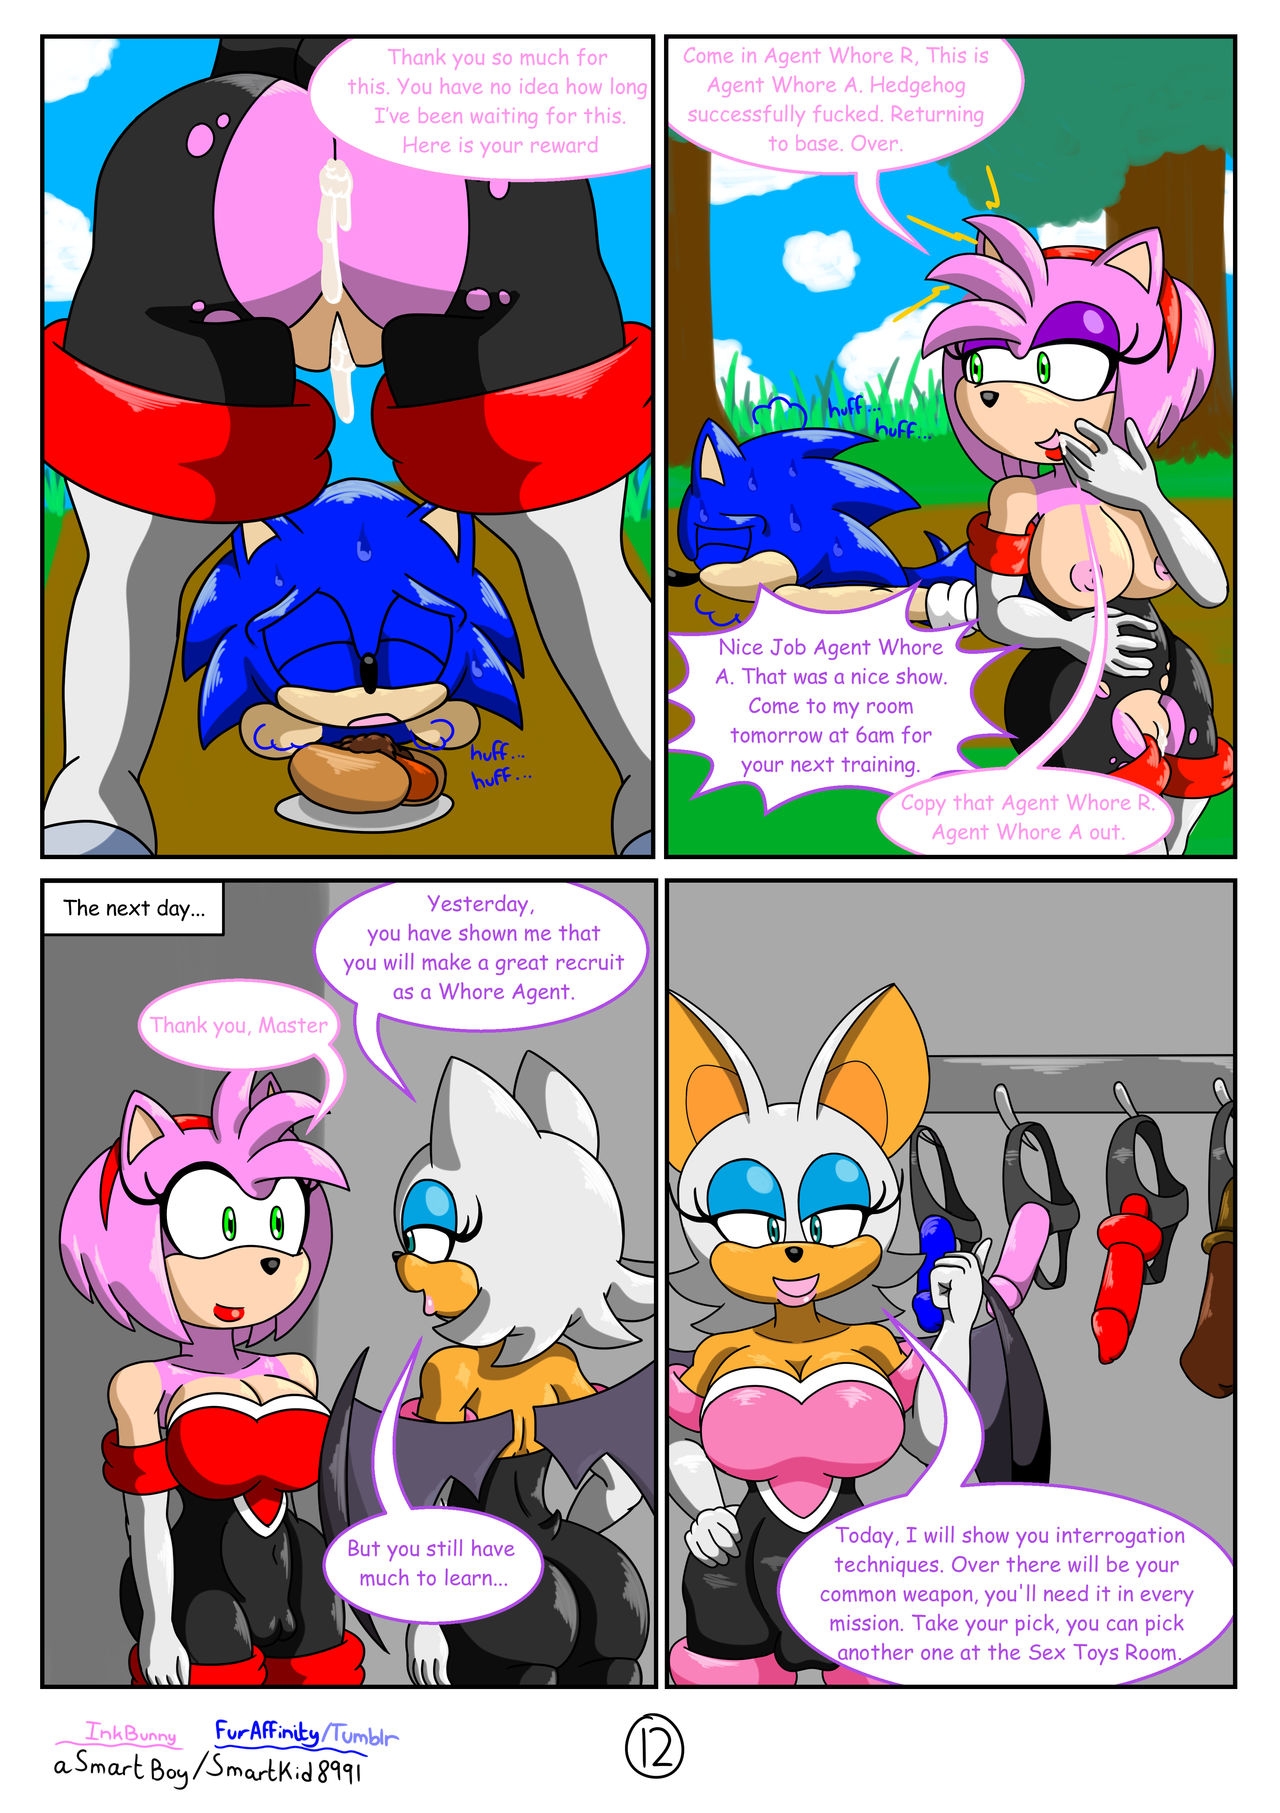 [SmartKid8991] Agent Whore Bootcamp (Sonic The Hedgehog) [Ongoing] 12